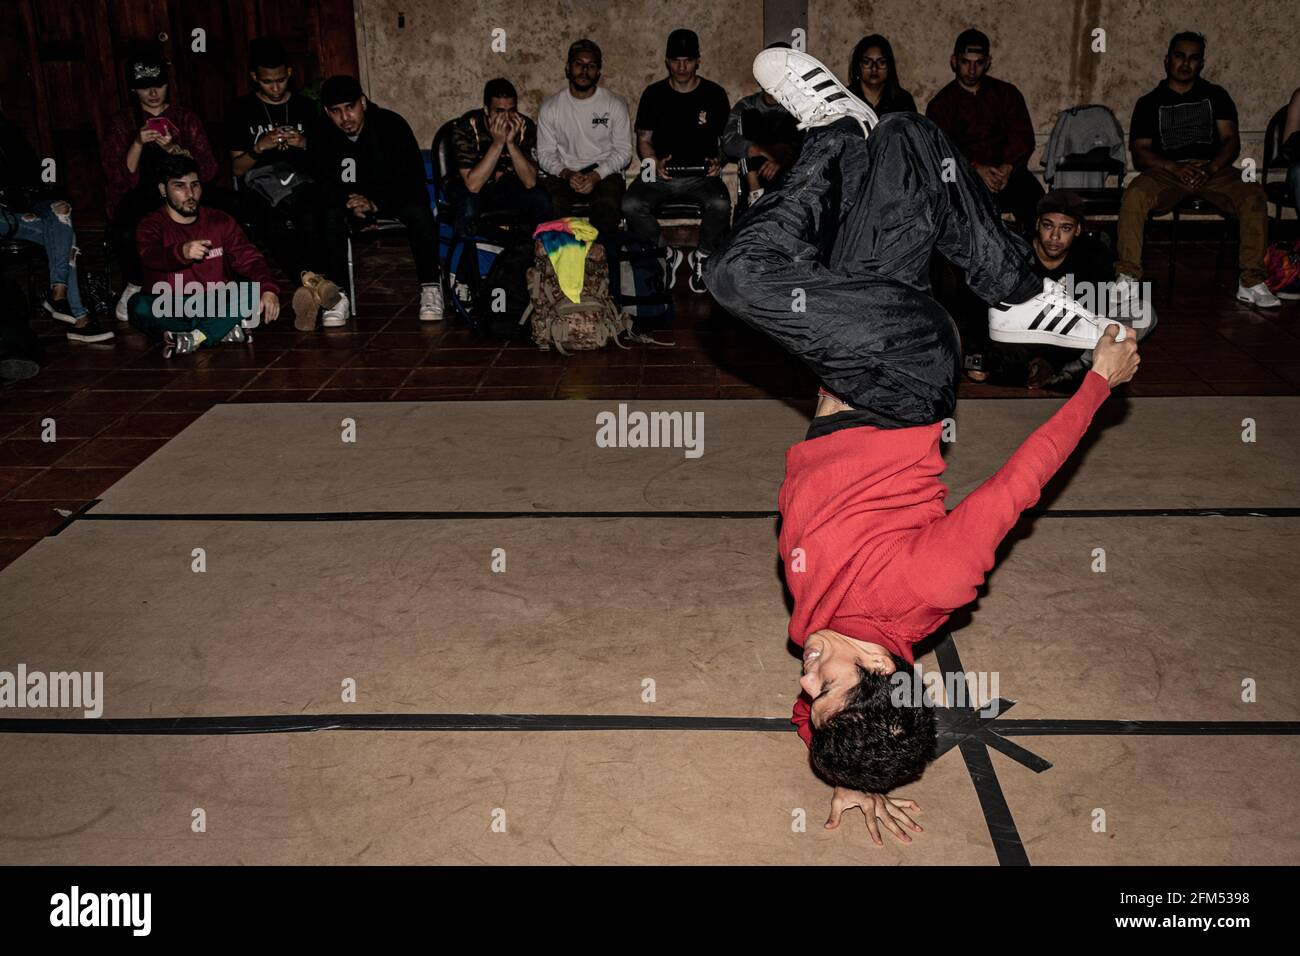 SAN JOSé, COSTA RICA - Feb 21, 2020: Costa Rica's Bboying or Breakdance artist competing in an event in San Jose Stock Photo